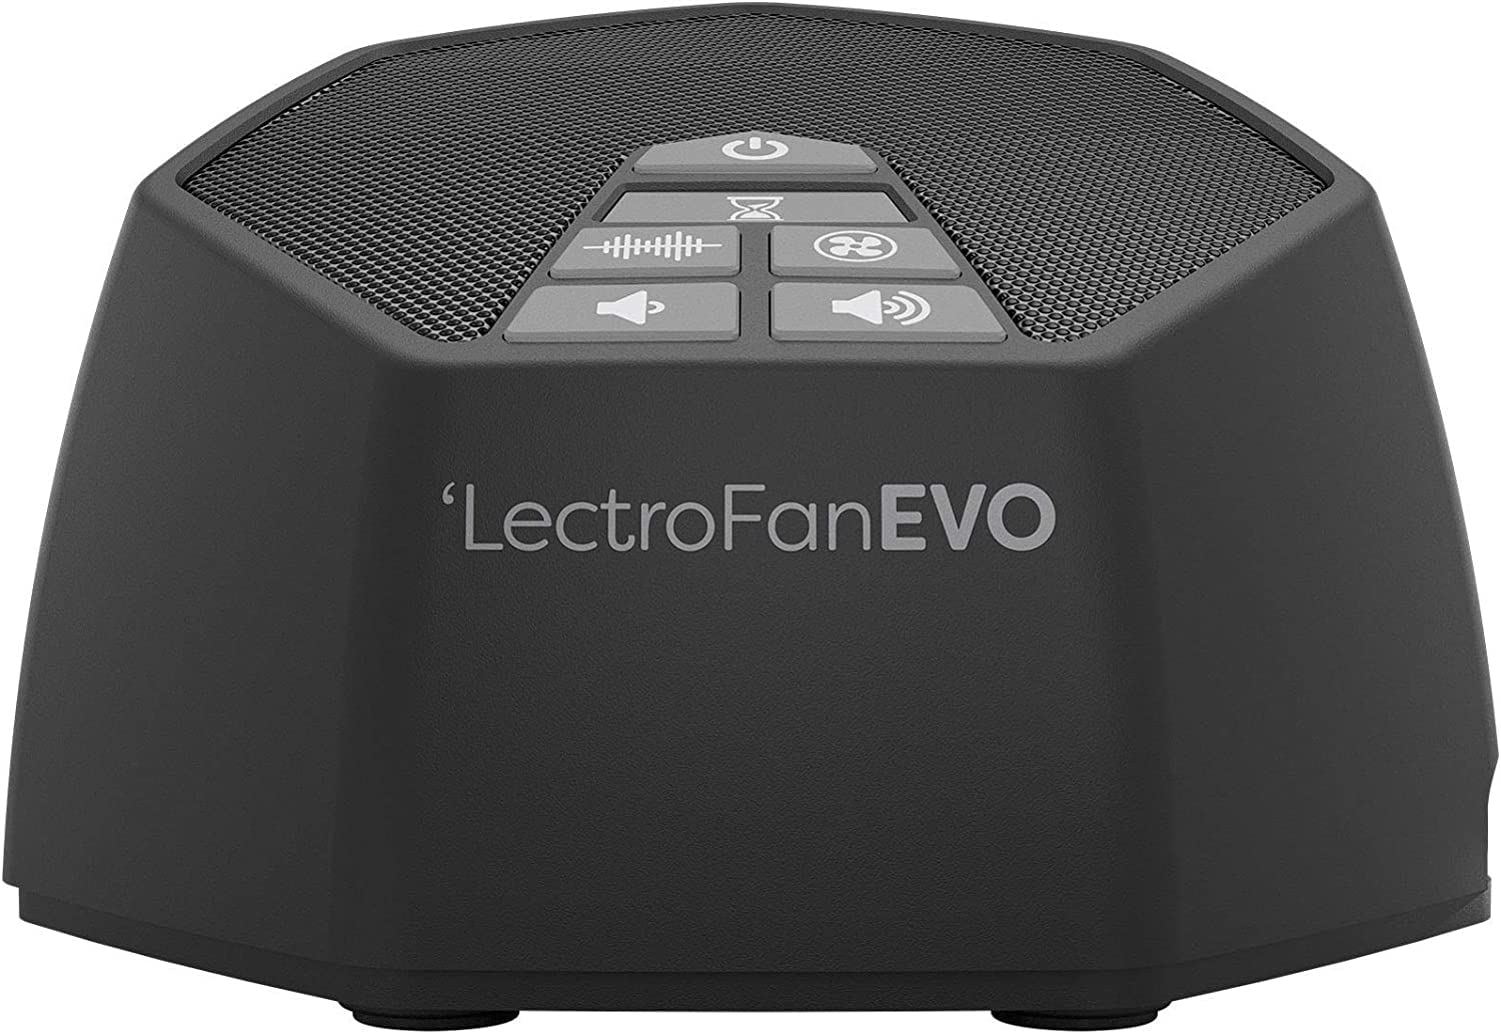 LectroFan EVO Sleep Sound Machine (22 Non-Looping Unique Sounds & White Noise Variations w/ Sleep Timer) $29.96 + Free Shipping w/ Prime or on $35+